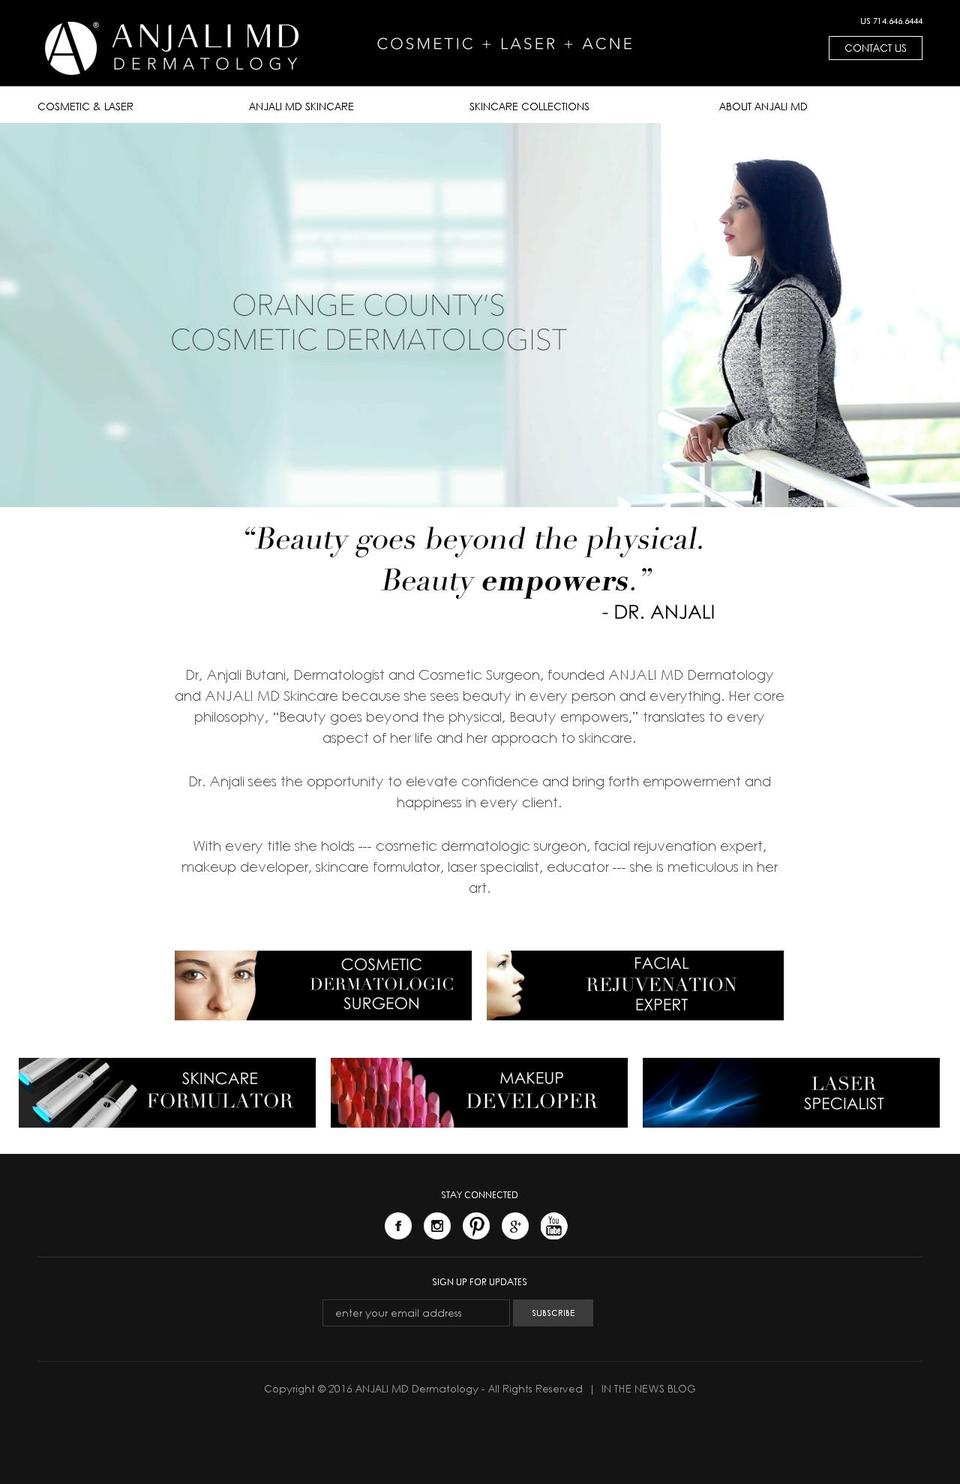 Anjali MD Site 2016 Shopify theme site example ocprecisionlift.net